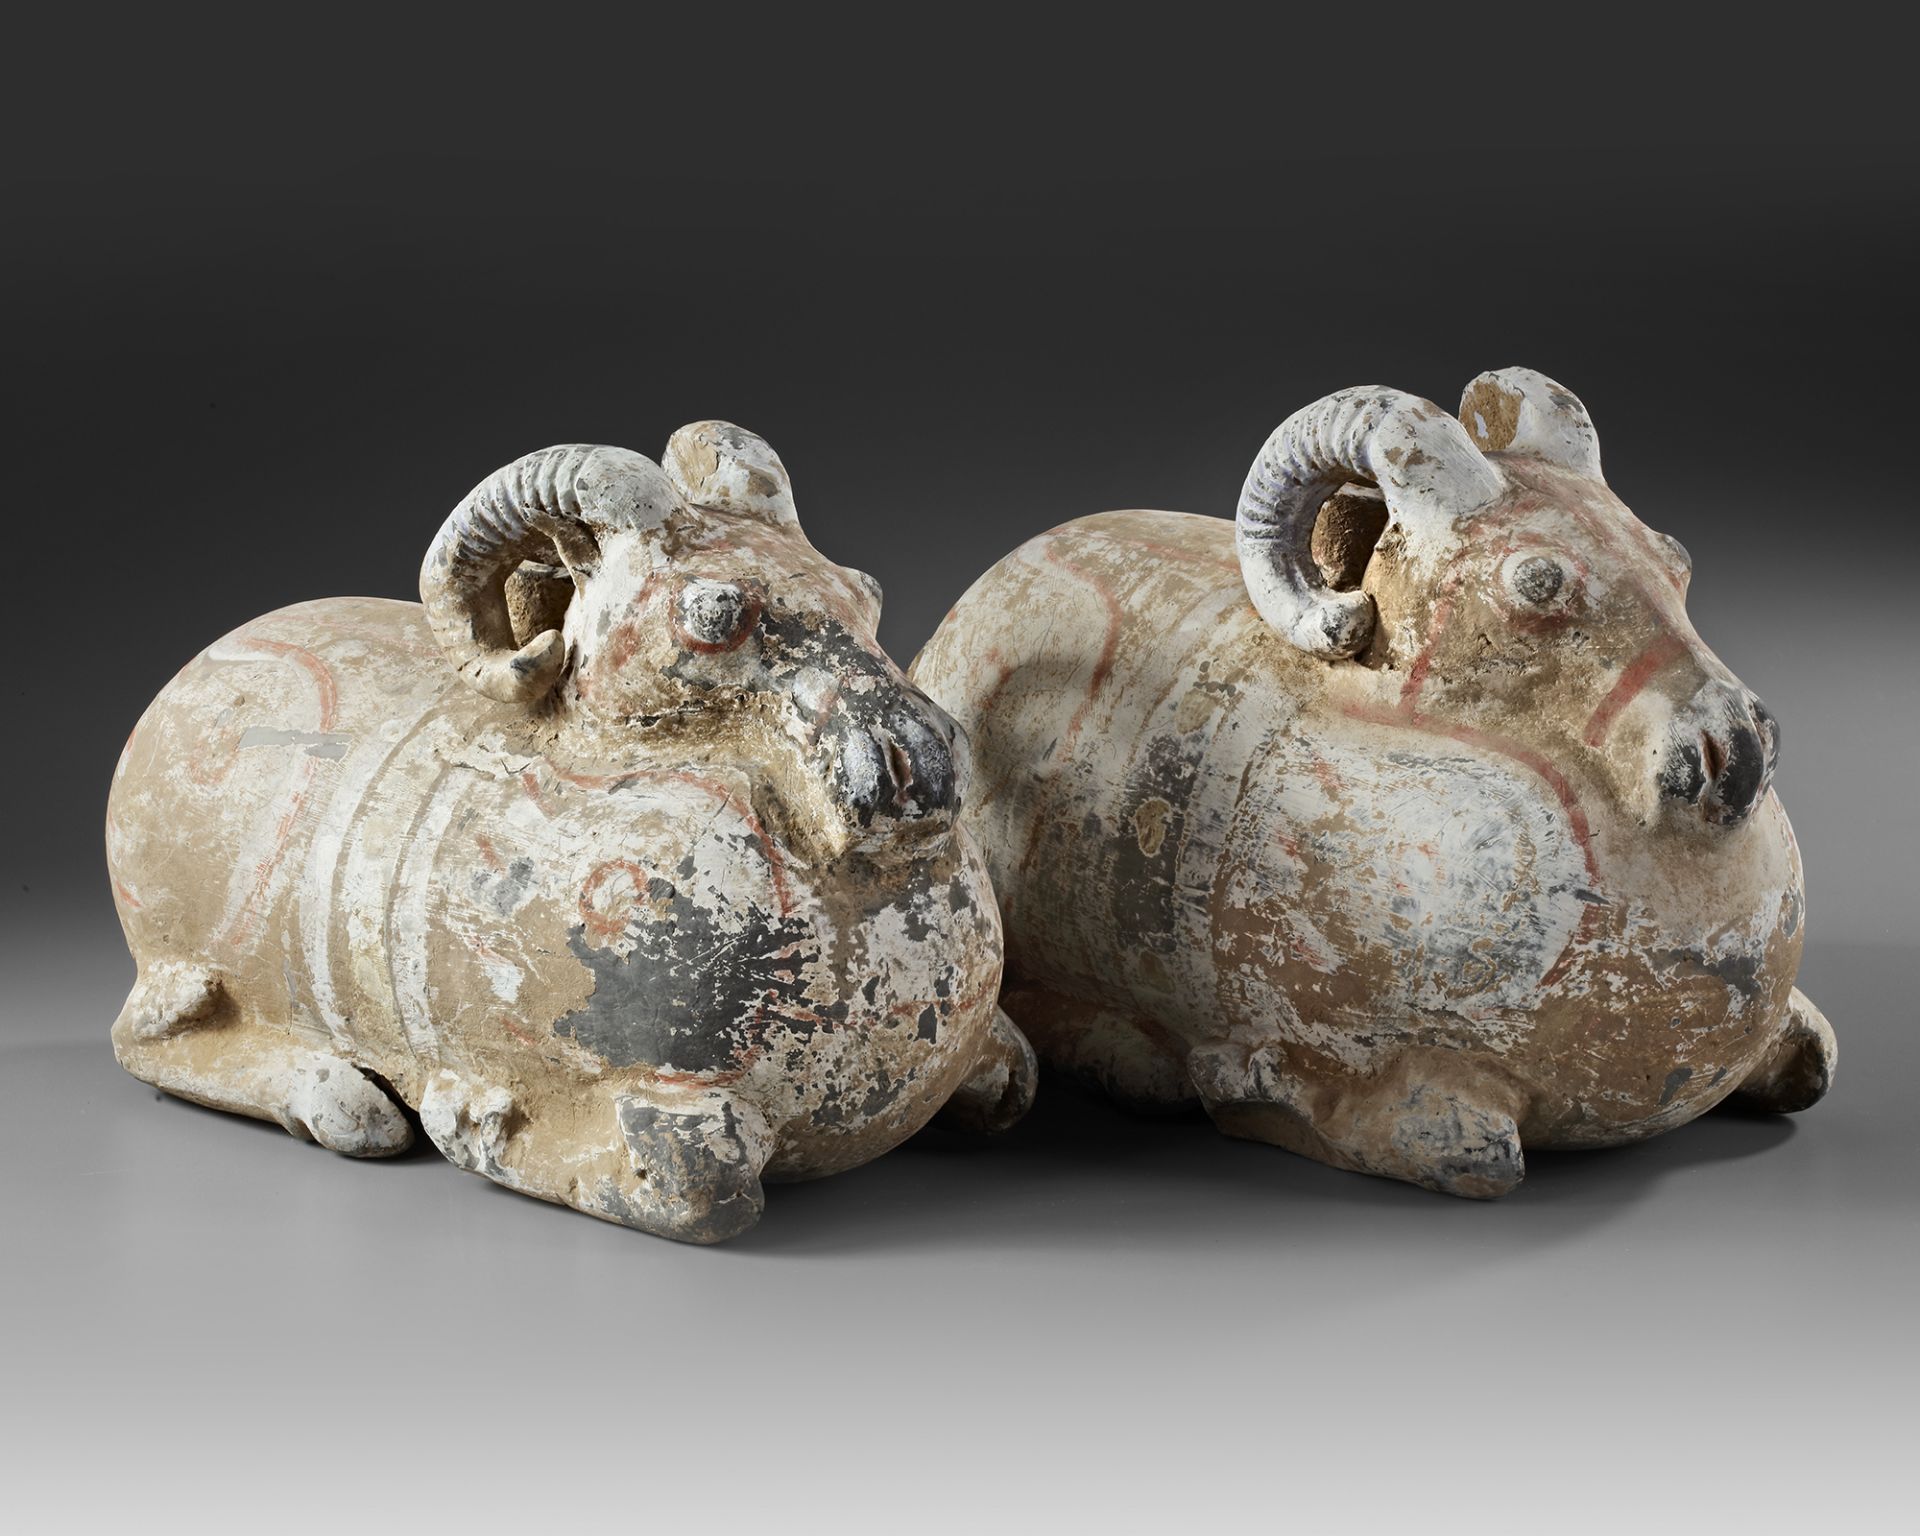 A PAIR OF TERRACOTTA VESSELS IN THE FORM OF A RAM, HAN DYNASTY (206 BC-220 AD) - Image 5 of 6